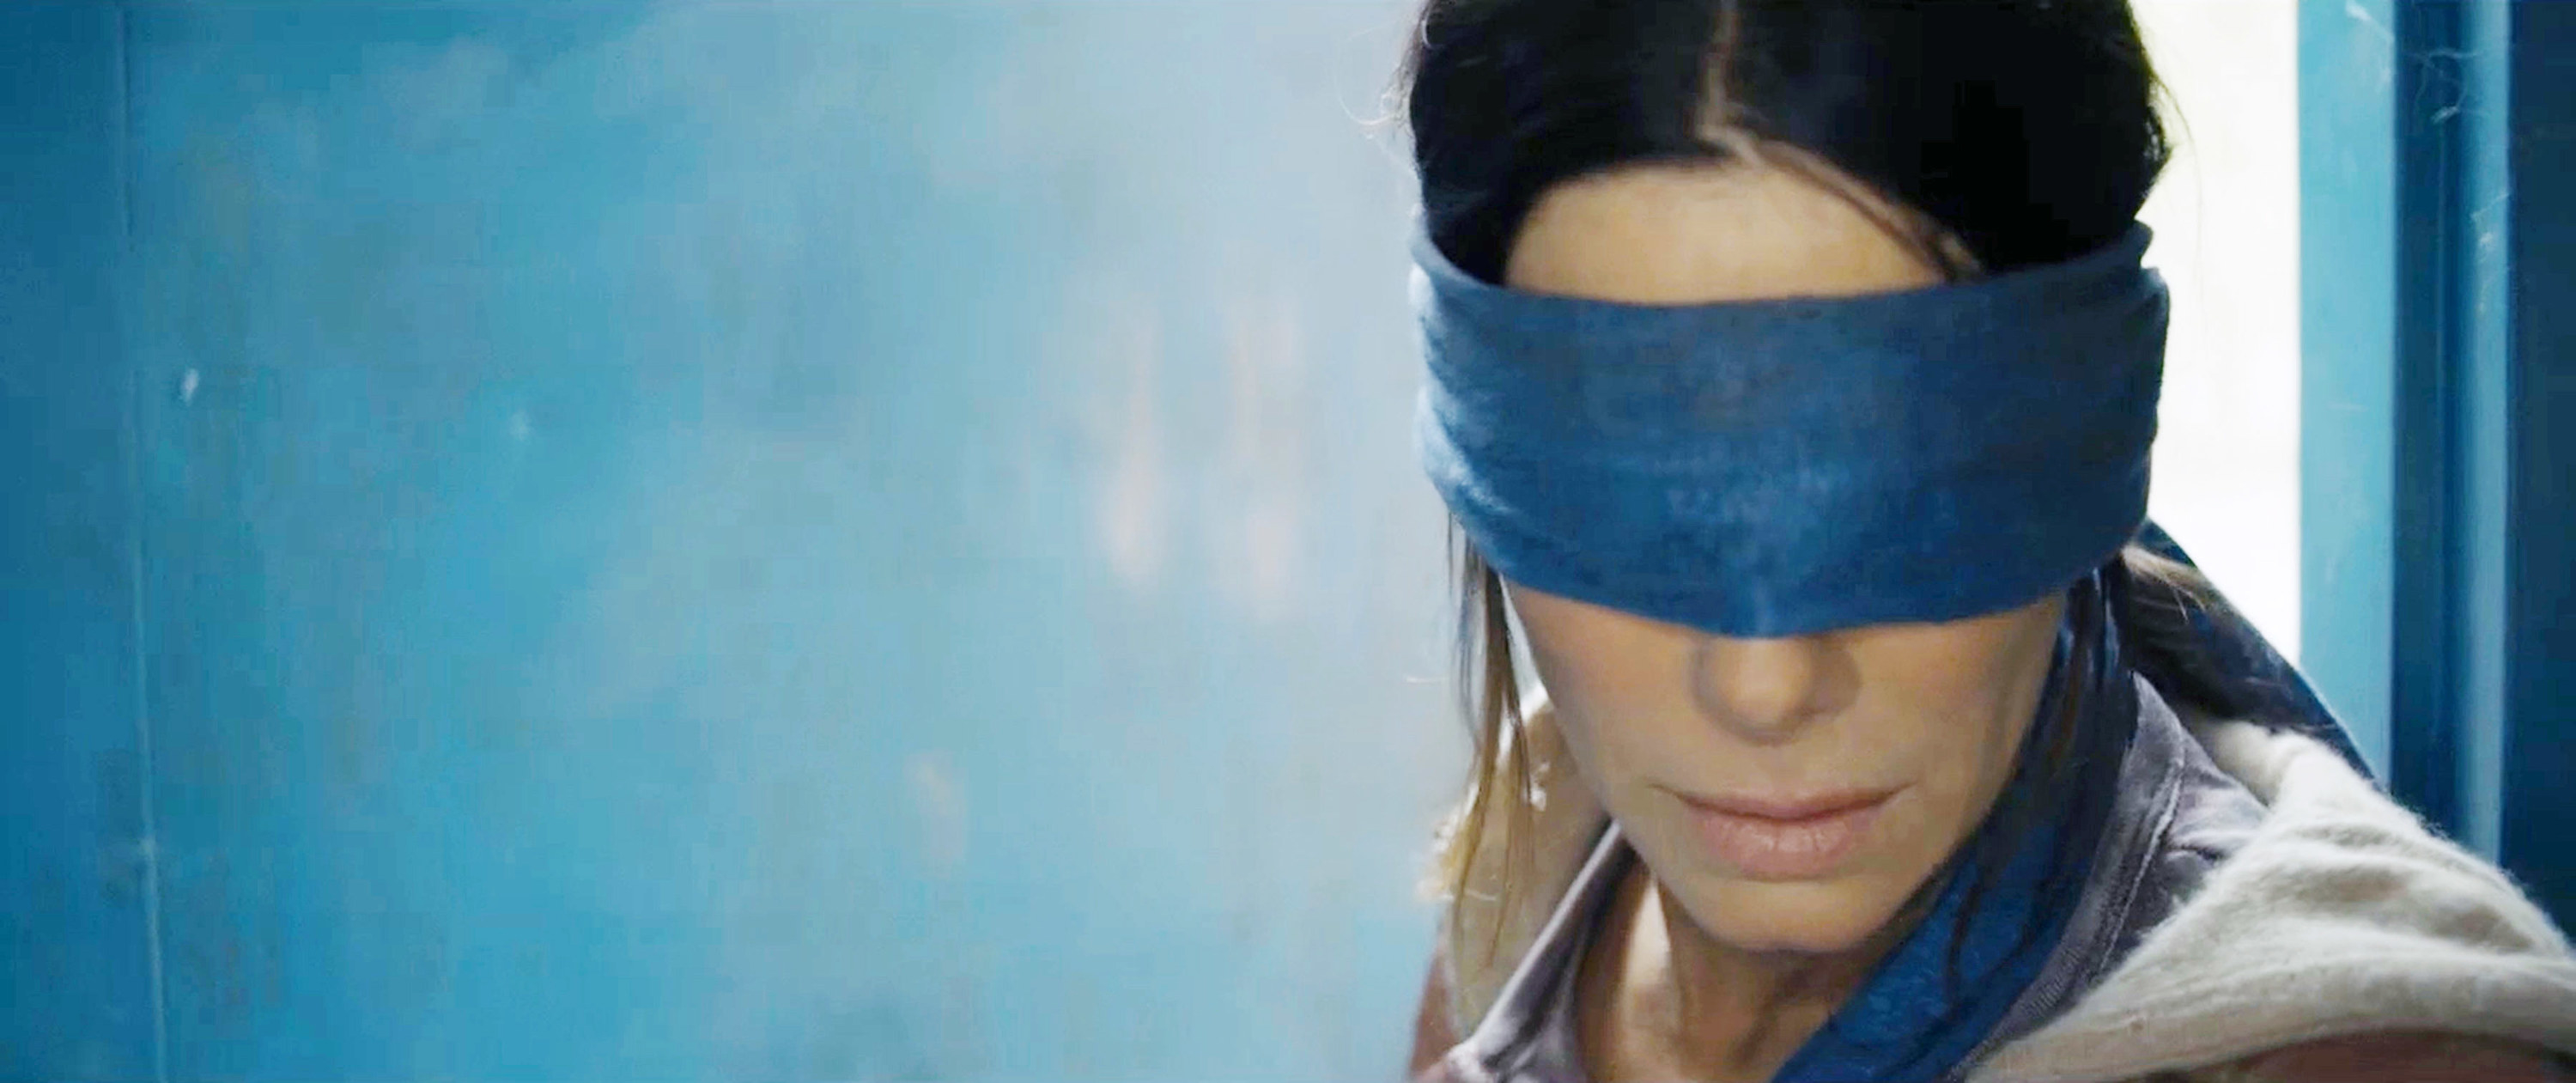 a woman with a blindfold on